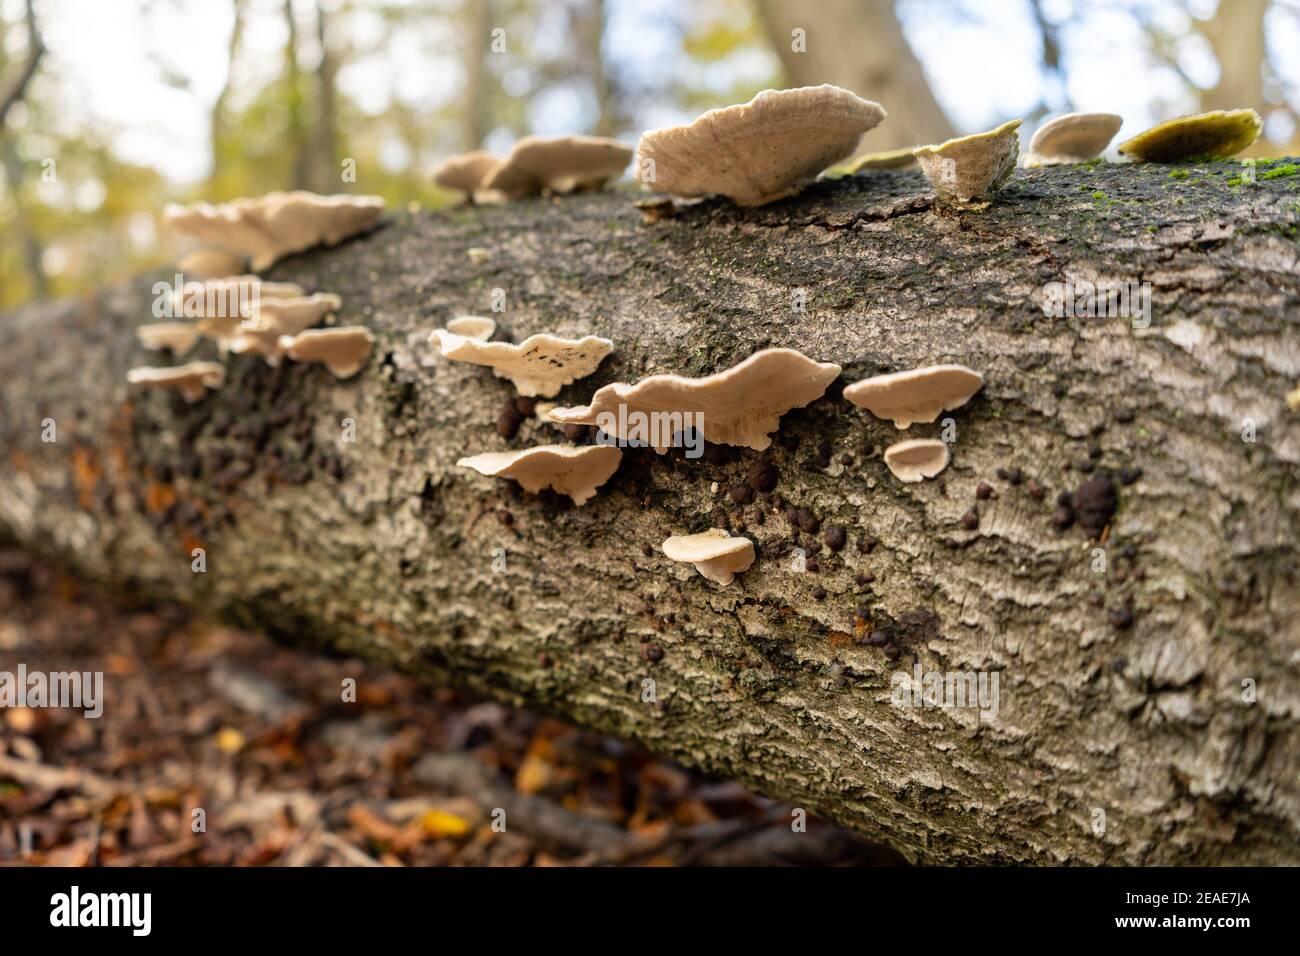 Polypores on fallen tree trunk stump in woodland in autumn, with trees in background and golden orange and brown leaves on forest floor Stock Photo